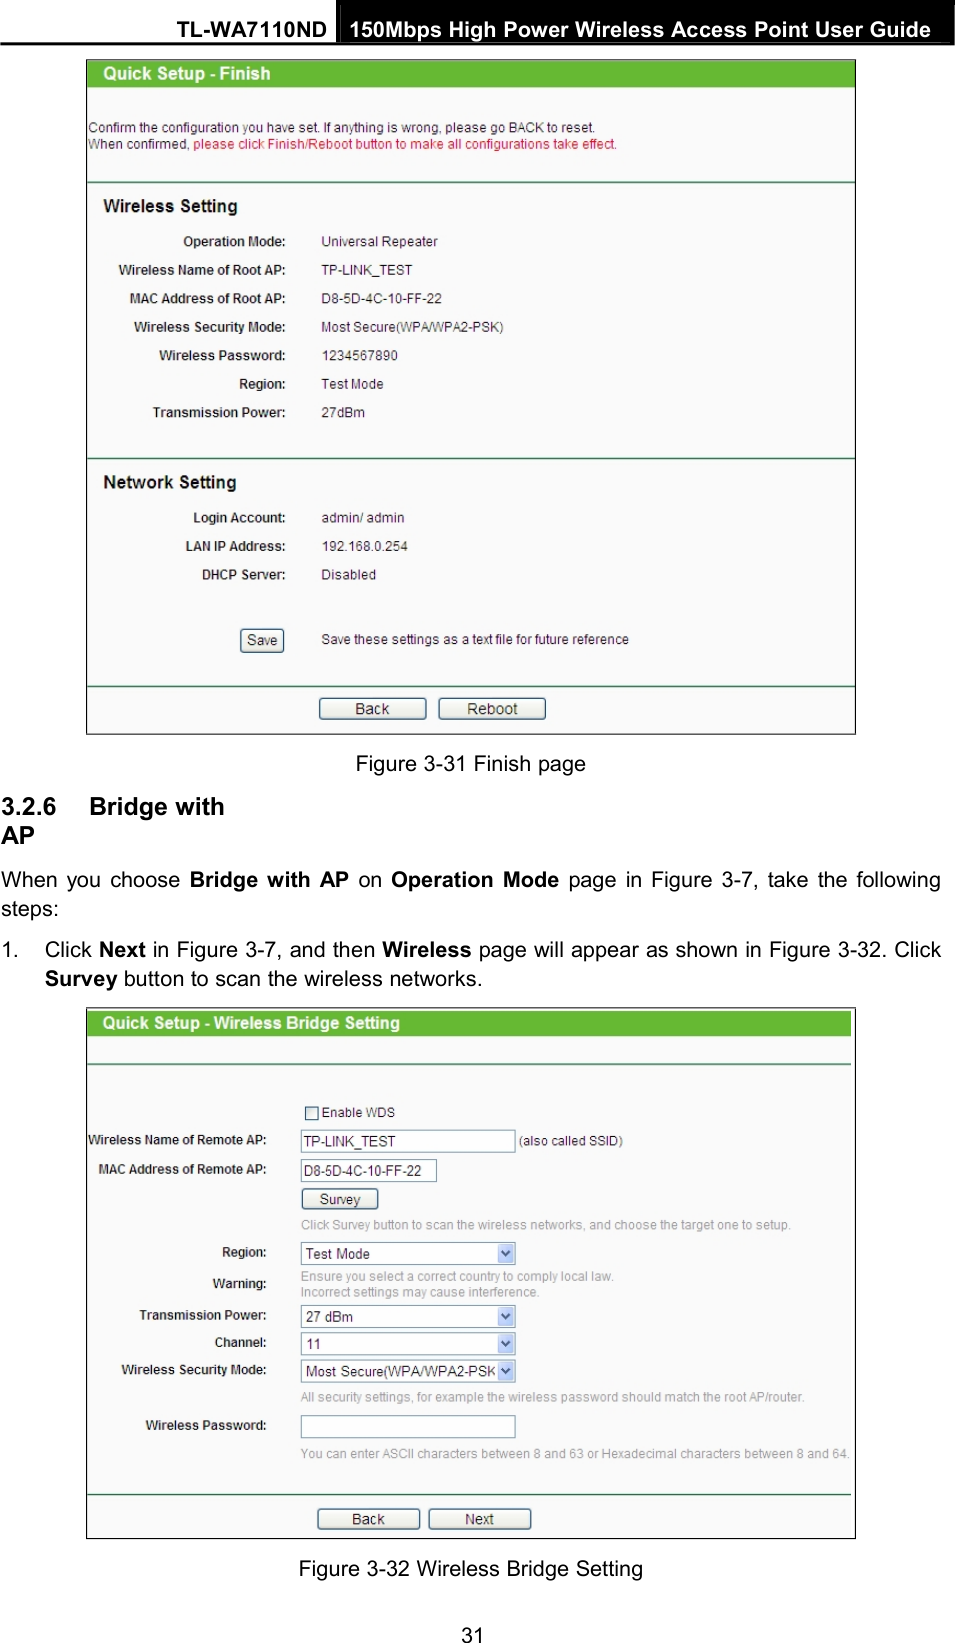 TL-WA7110ND 150Mbps High Power Wireless Access Point User Guide3.2.6 Bridge withAPFigure 3-31 Finish pageWhen you choose Bridge with AP on Operation Mode page in Figure 3-7, take the followingsteps:1. Click Next in Figure 3-7, and then Wireless page will appear as shown in Figure 3-32. ClickSurvey button to scan the wireless networks.Figure 3-32 Wireless Bridge Setting31